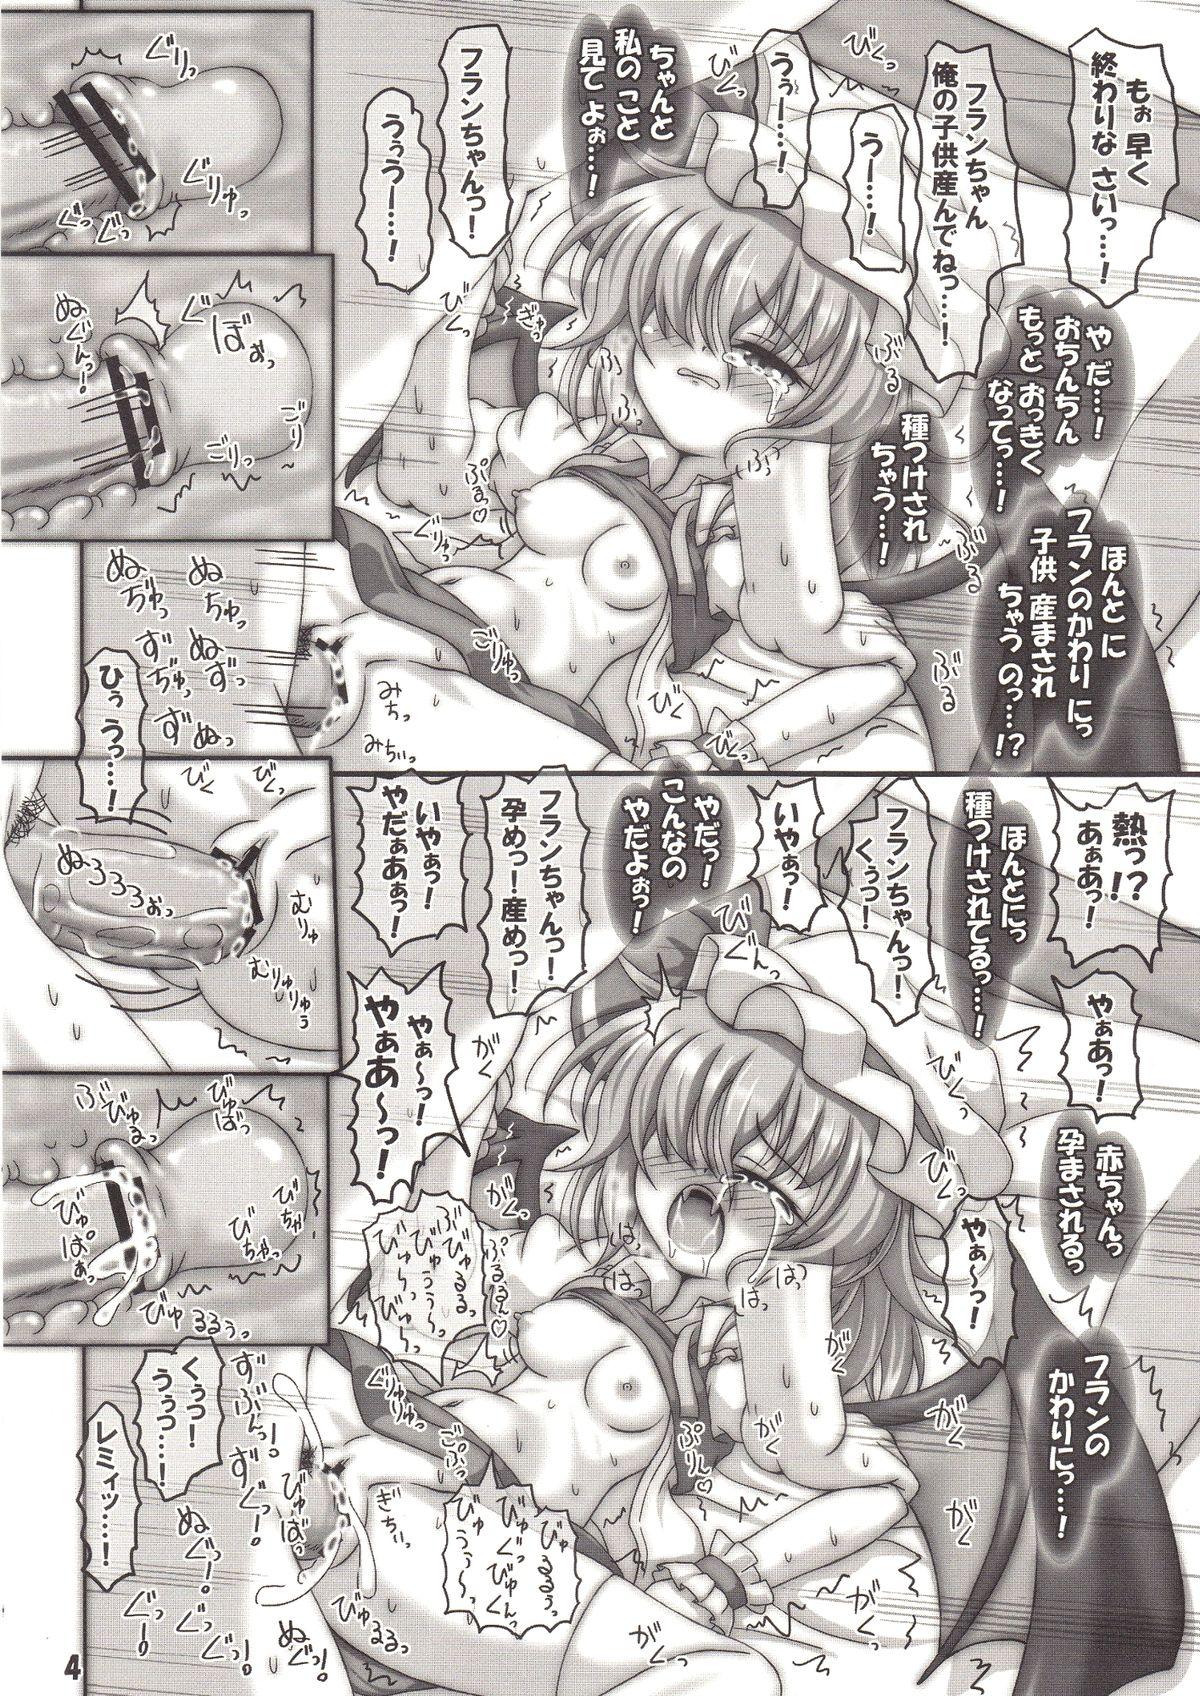 Scissoring CospRemilia! - Touhou project Amatures Gone Wild - Page 4